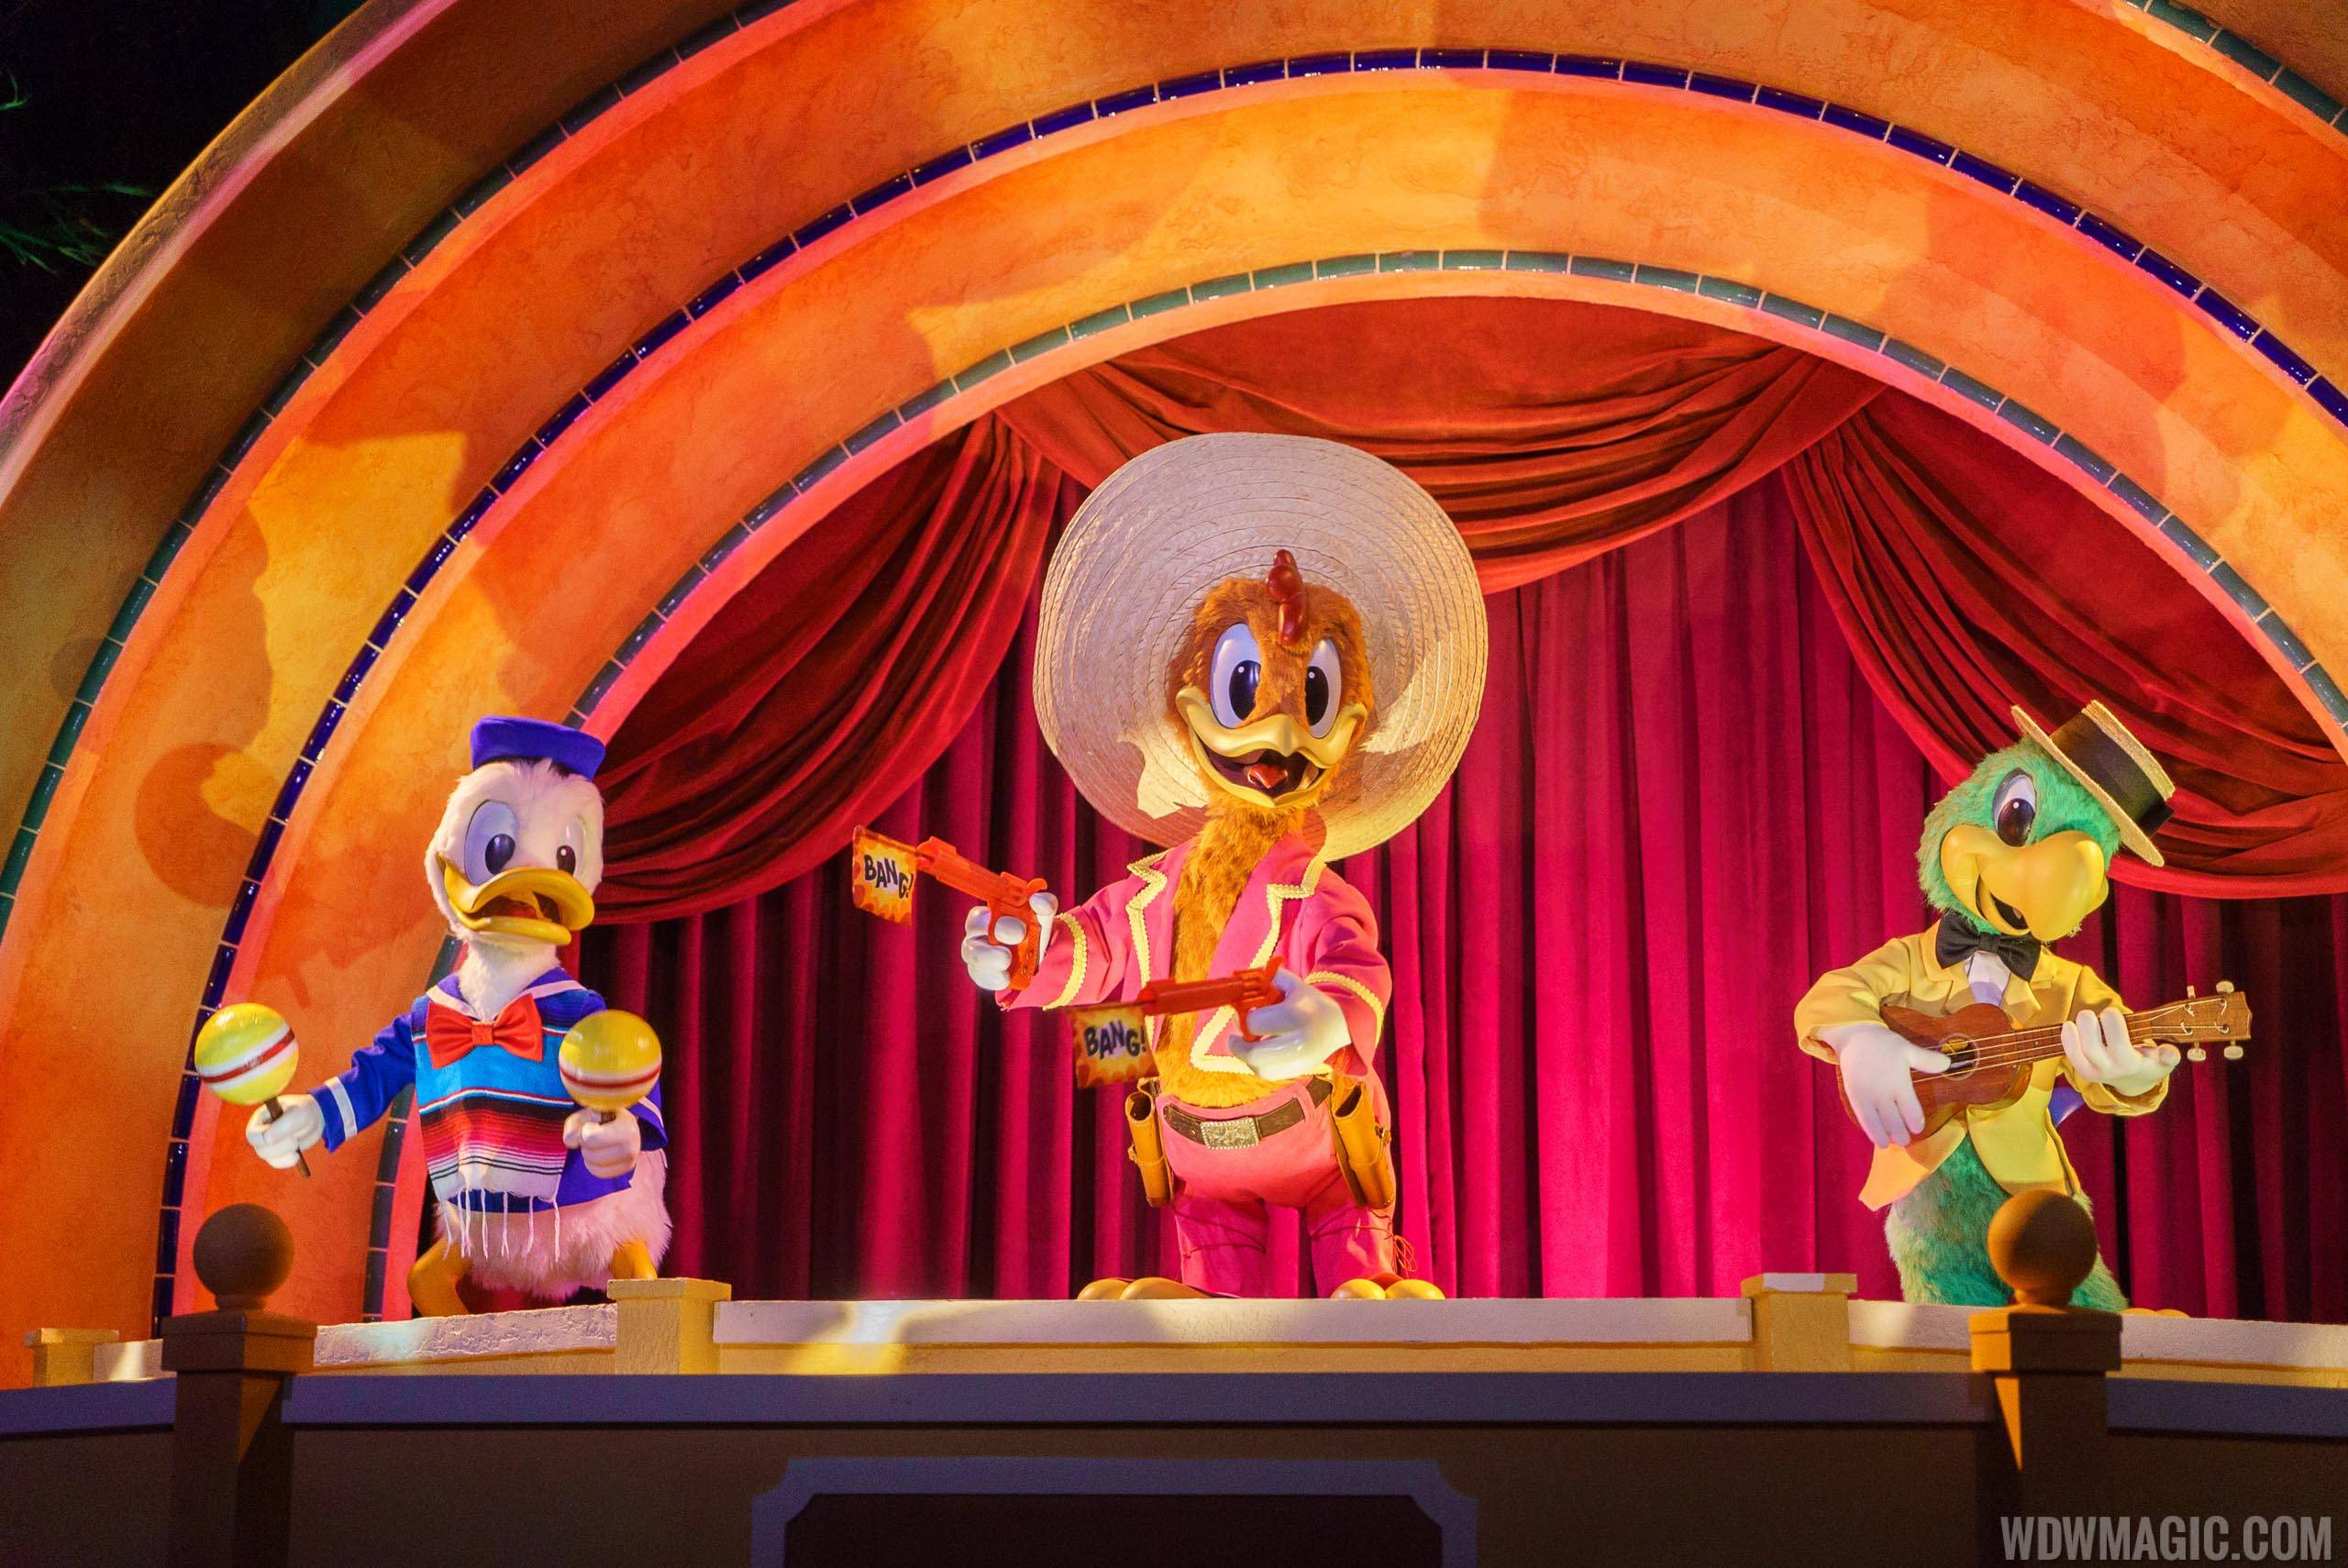 VIDEO - Epcot's Gran Fiesta Tour Starring the Three Caballeros gets new animatronic finale